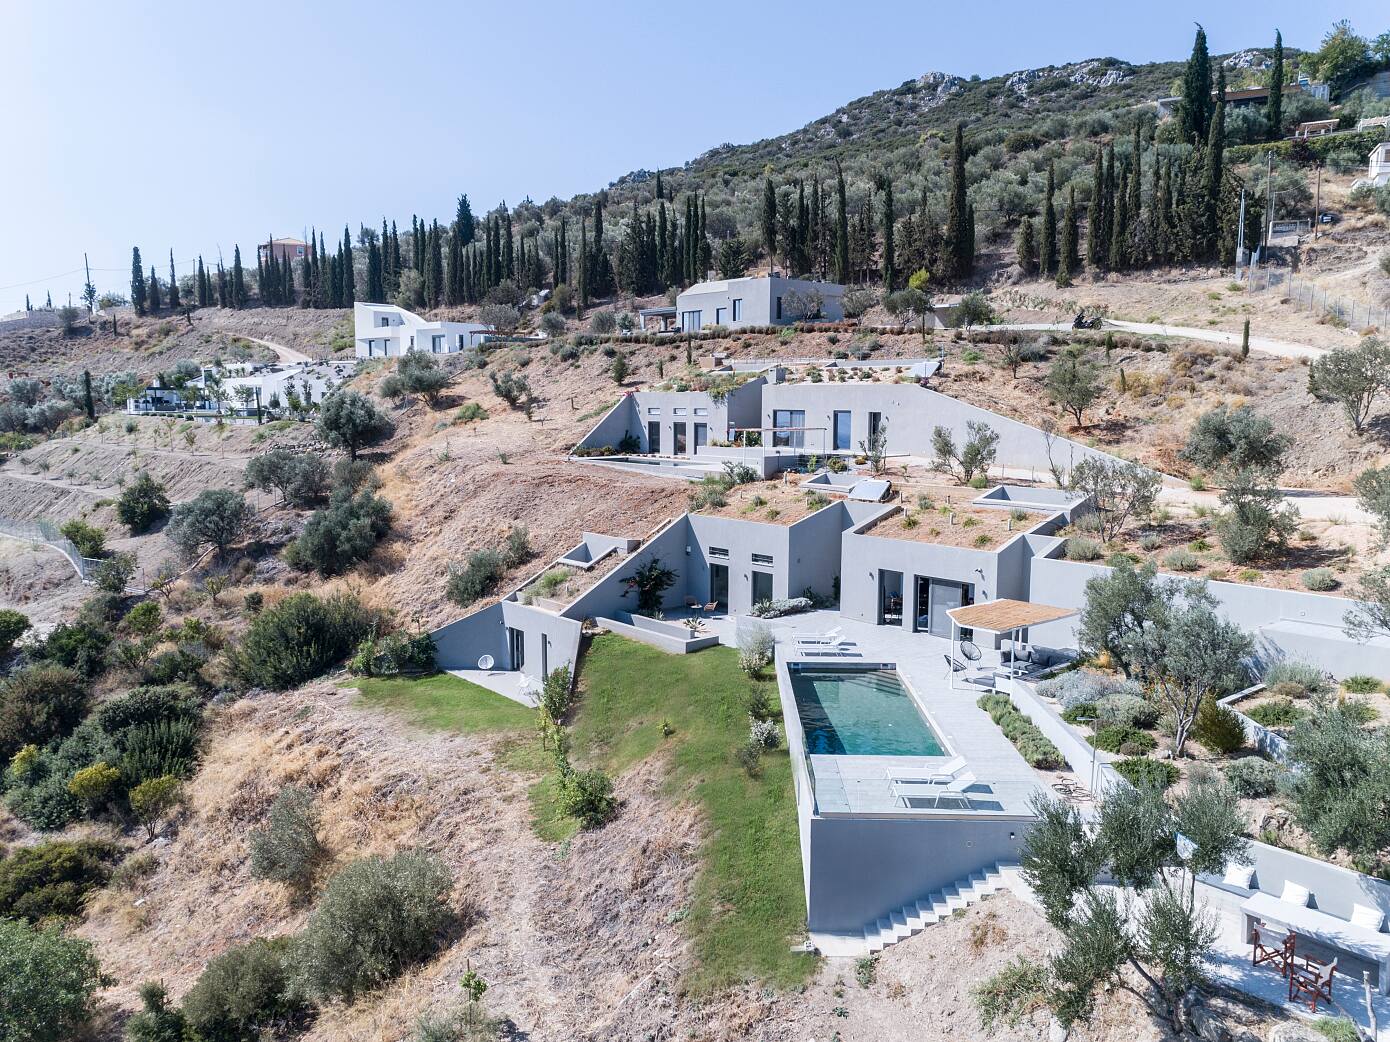 House Complex at Tolo by Sotiris Anyfantis